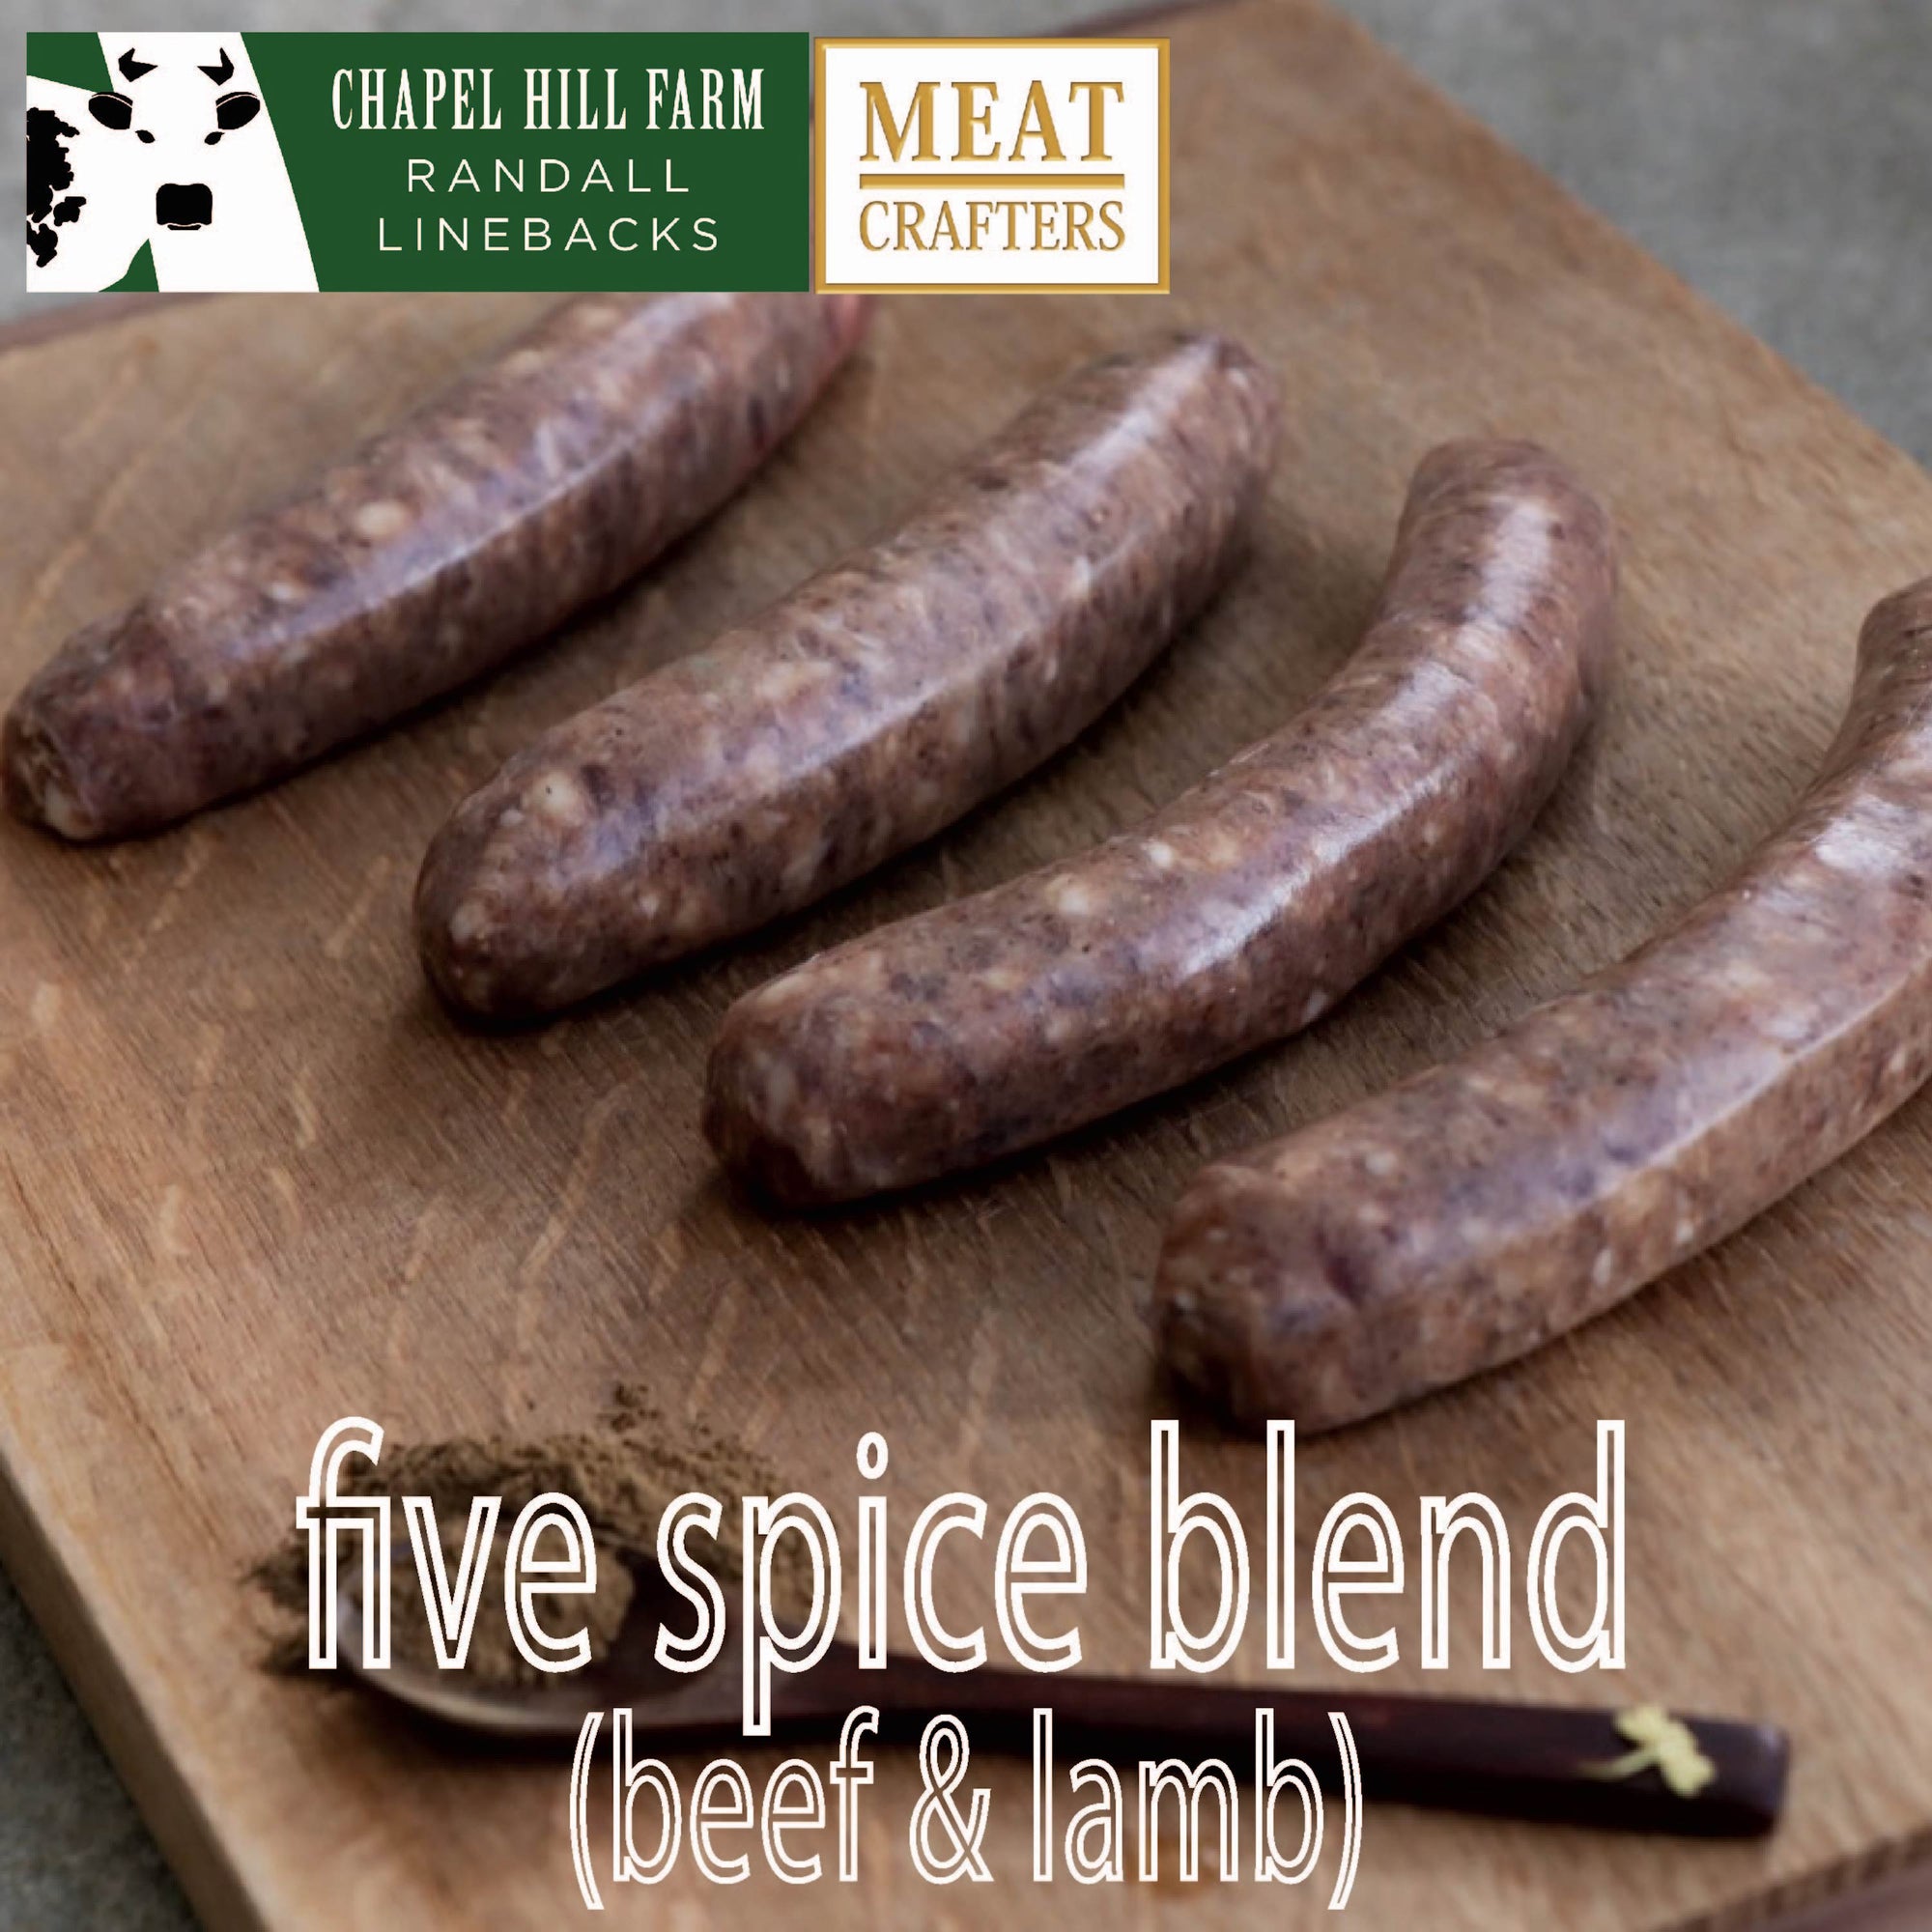 Randall Lineback Beef Sausages: Five Spice